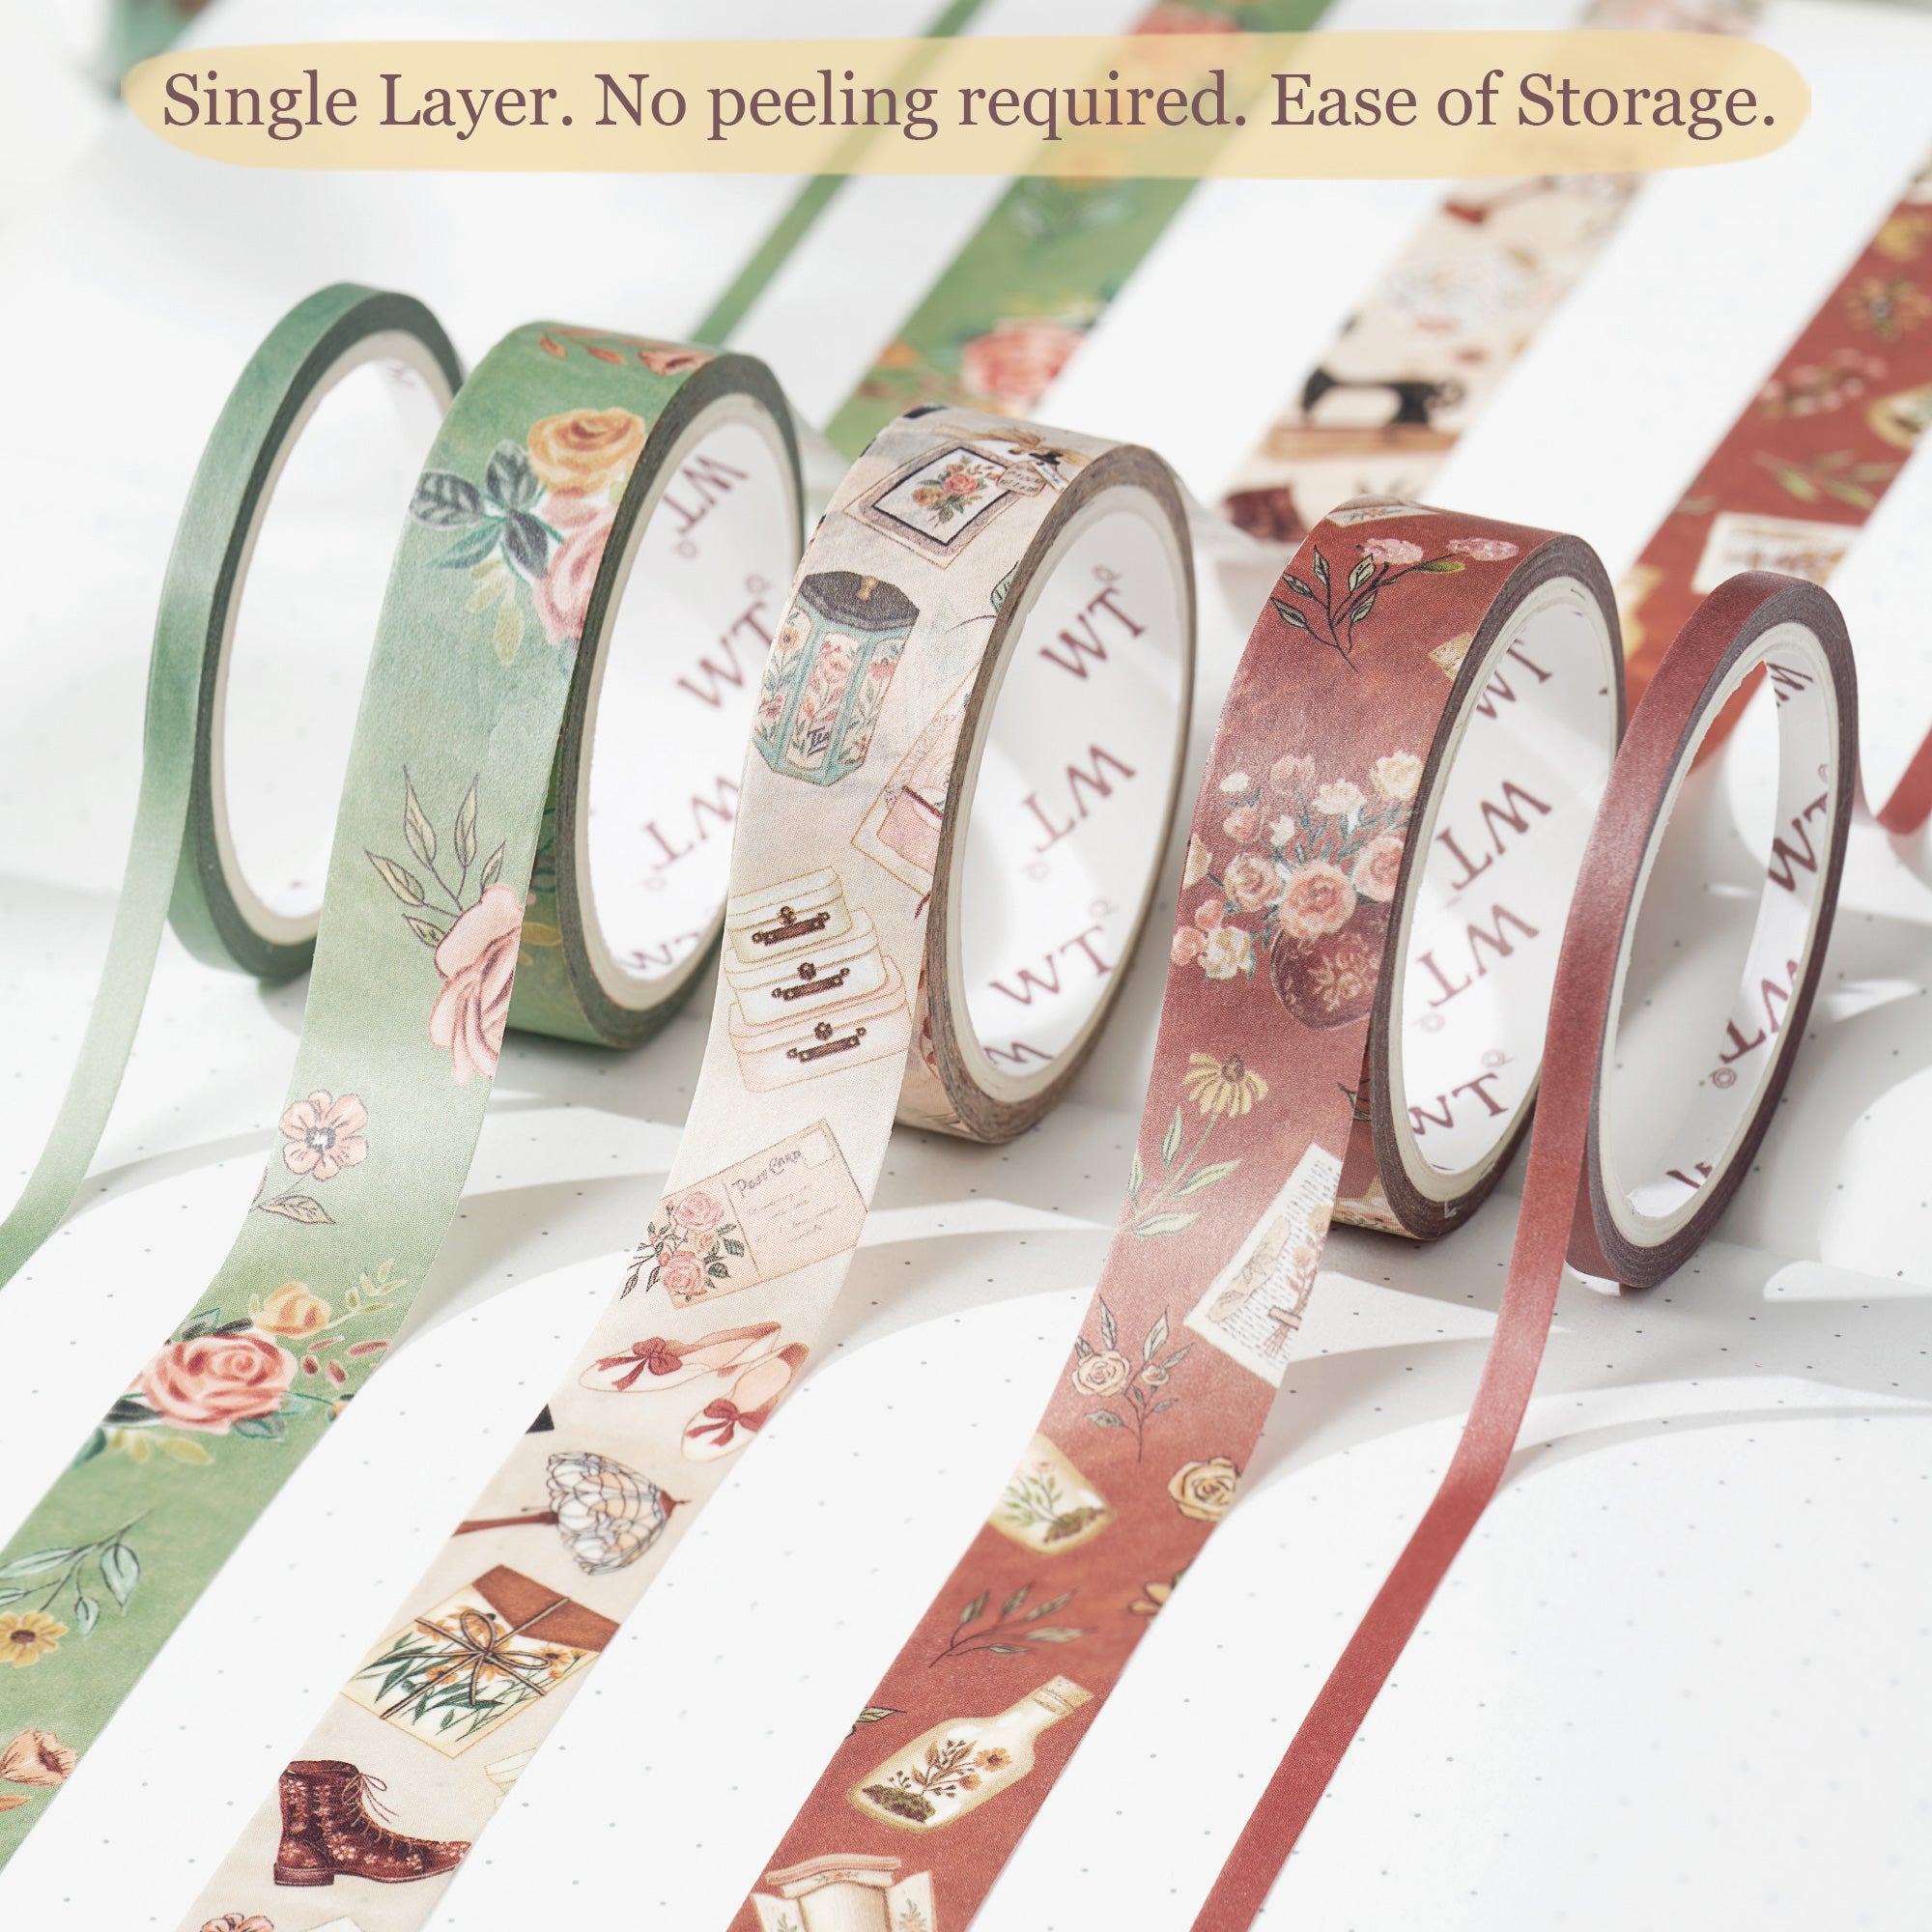 Fragrant Memories Washi Tape Set | The Washi Tape Shop. Beautiful Washi and Decorative Tape For Bullet Journals, Gift Wrapping, Planner Decoration and DIY Projects